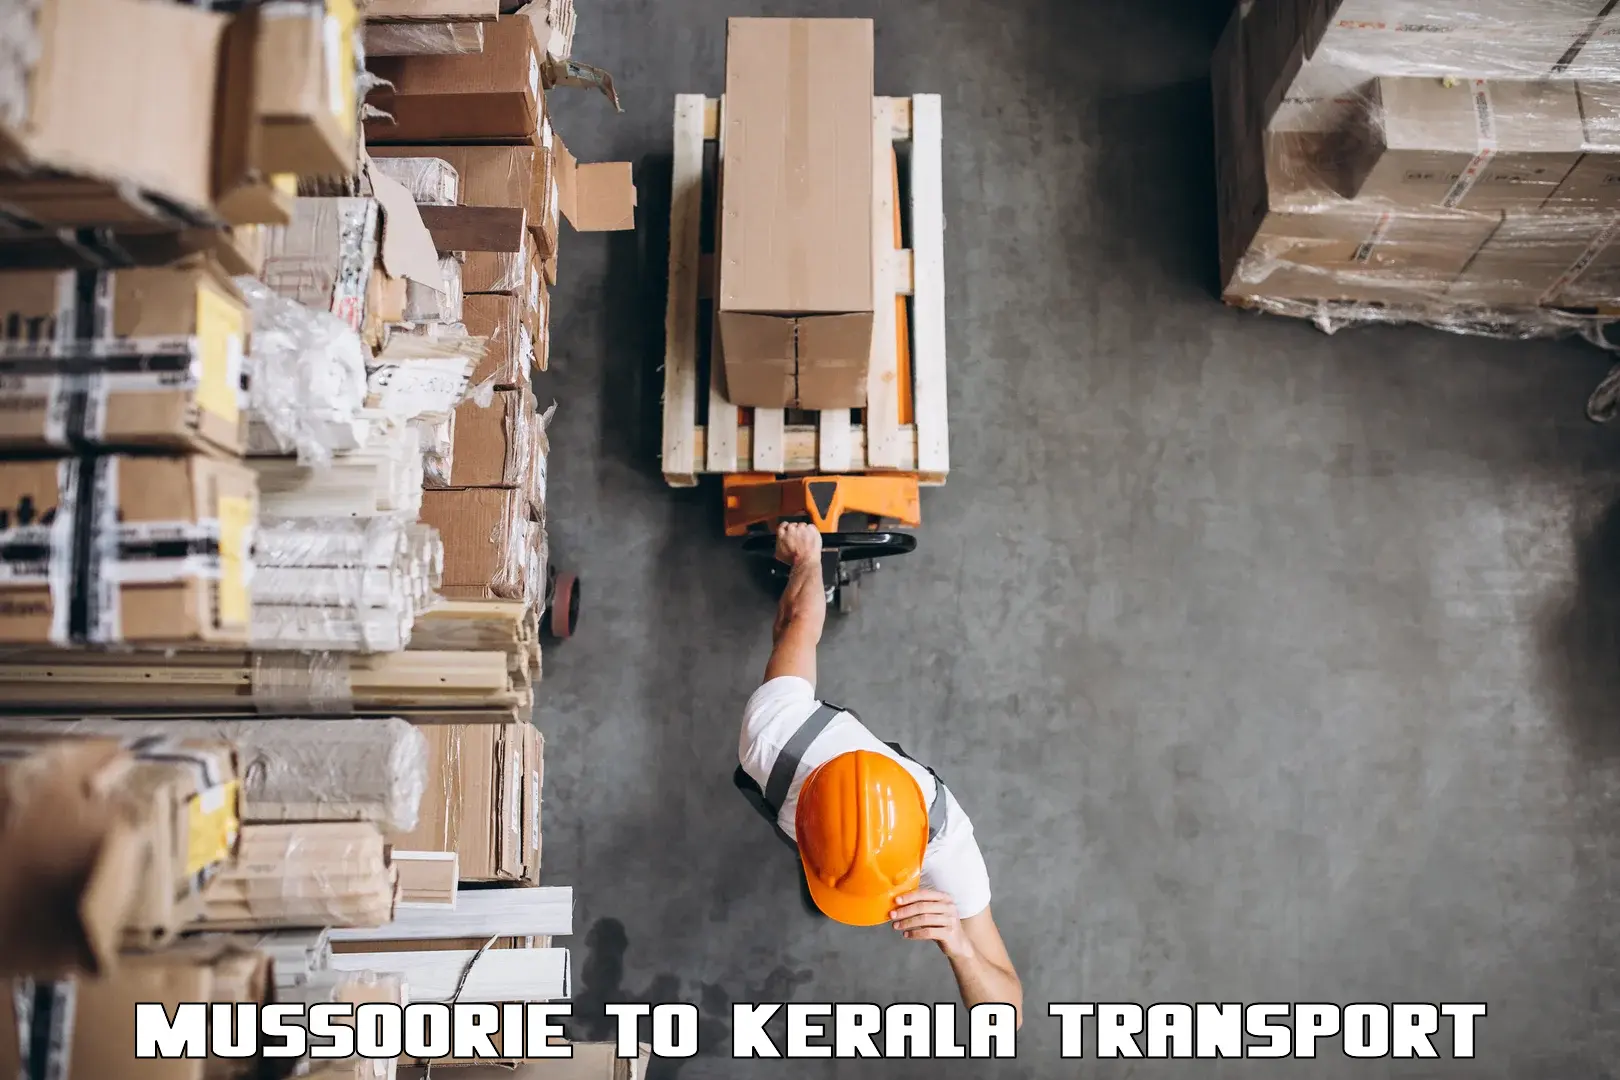 Truck transport companies in India Mussoorie to Kerala